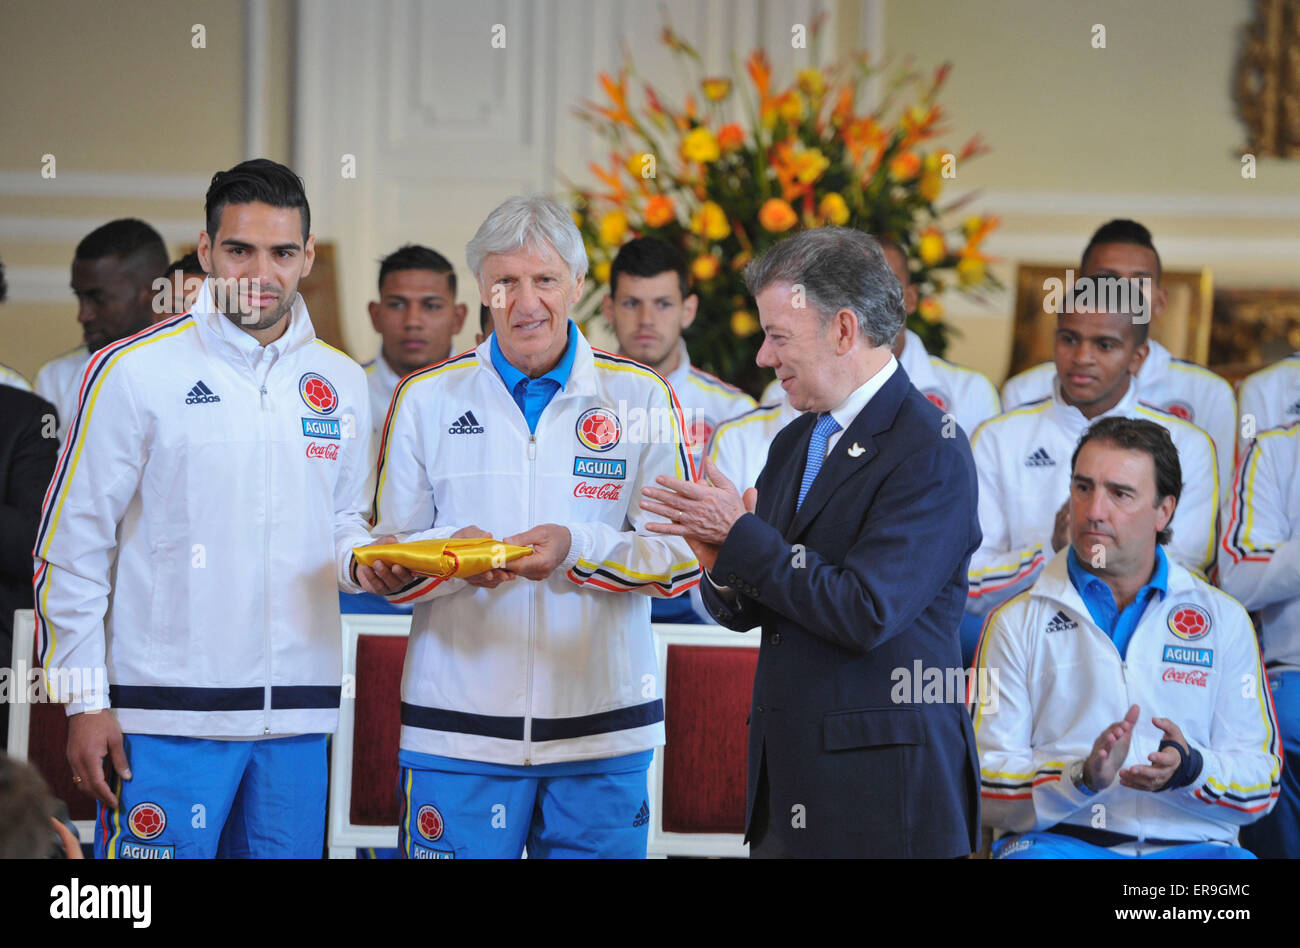 Bogota, Colombia. 29th May, 2015. Image provided by Colombia's Presidency shows Colombian President Juan Manuel Santos (2nd R) delivering the National Colombian flag to head coach Jose Pekerman (2nd L) and player Radamel Falcao (1st L) of Colombia's national soccer team, that will take part in the Copa America Chile 2015, in Bogota, capital of Colombia, on May 29, 2015. © Efrain Herrera/Colombia's Presidency/Xinhua/Alamy Live News Stock Photo